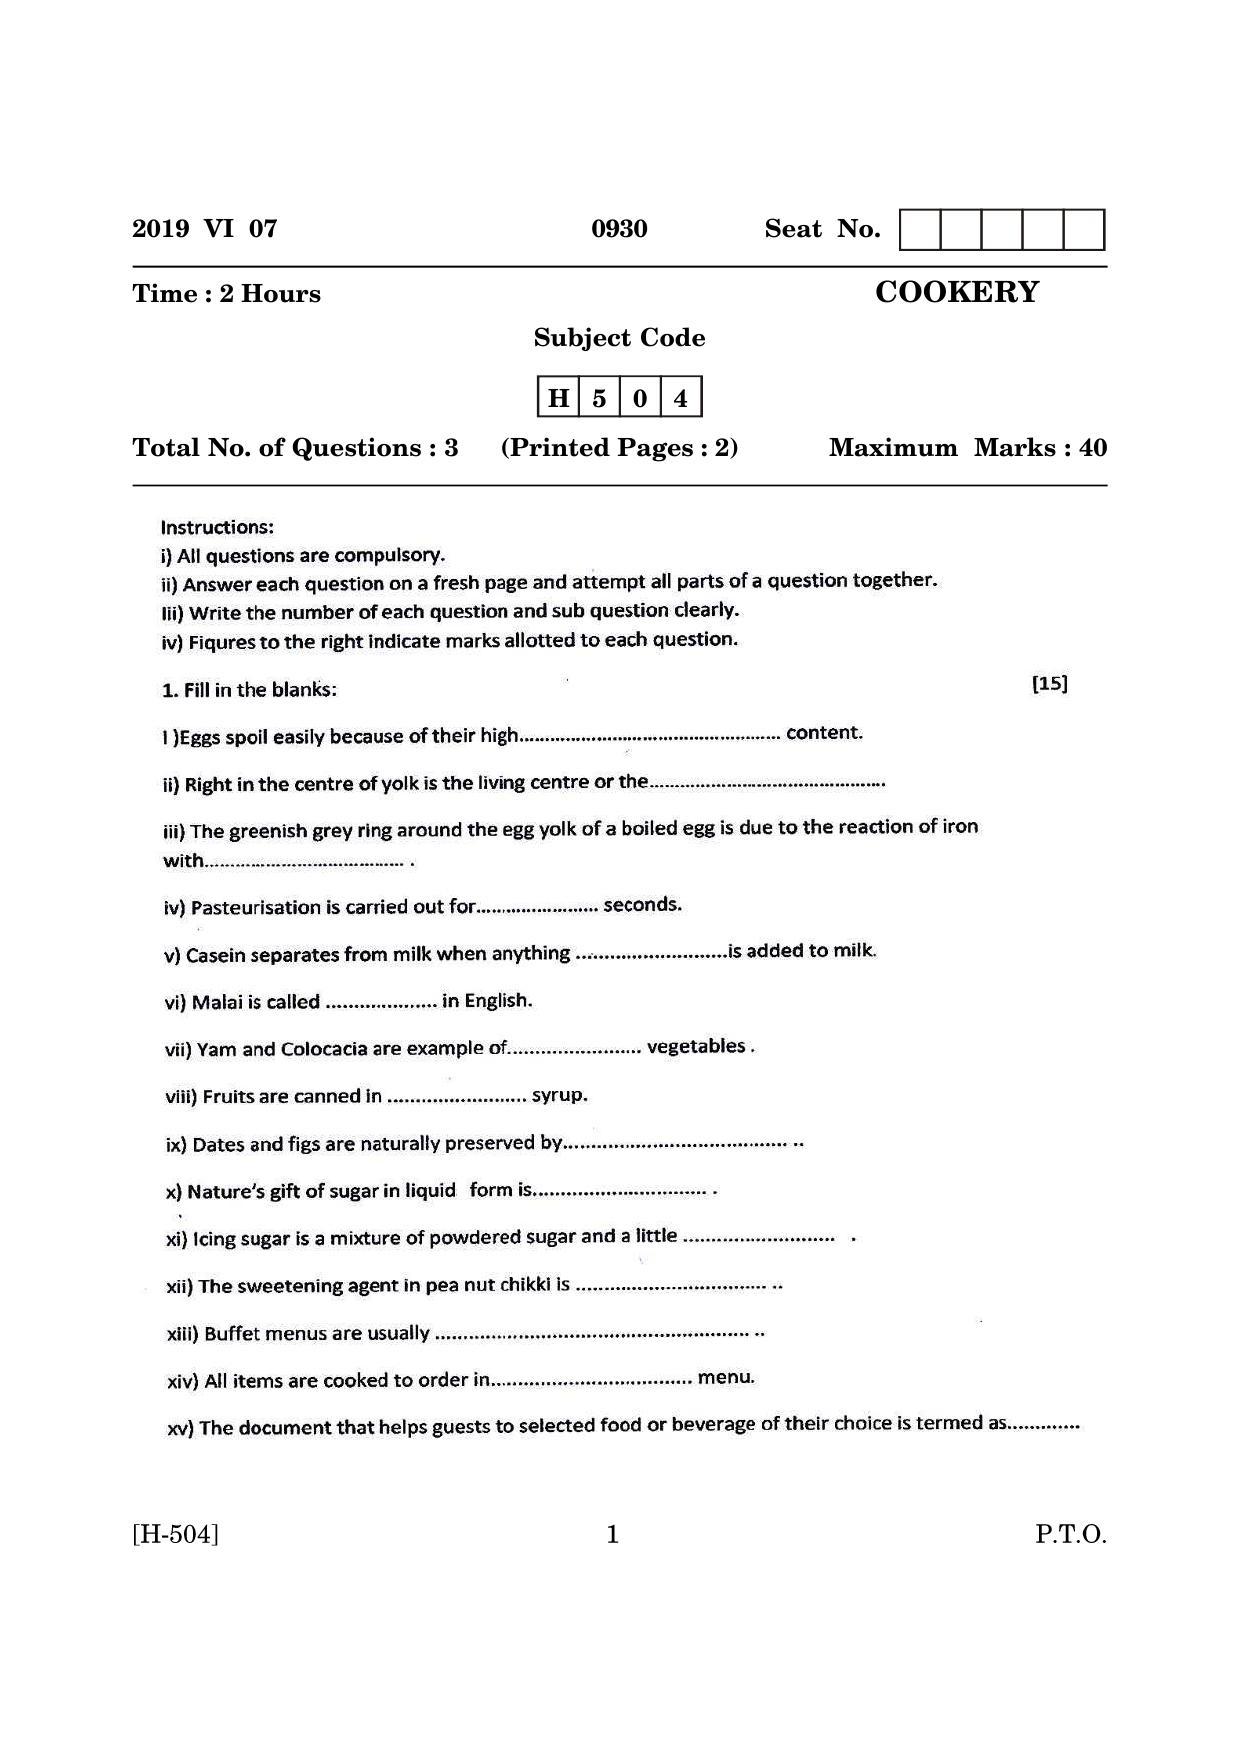 Goa Board Class 12 Cookery   (June 2019) Question Paper - Page 1